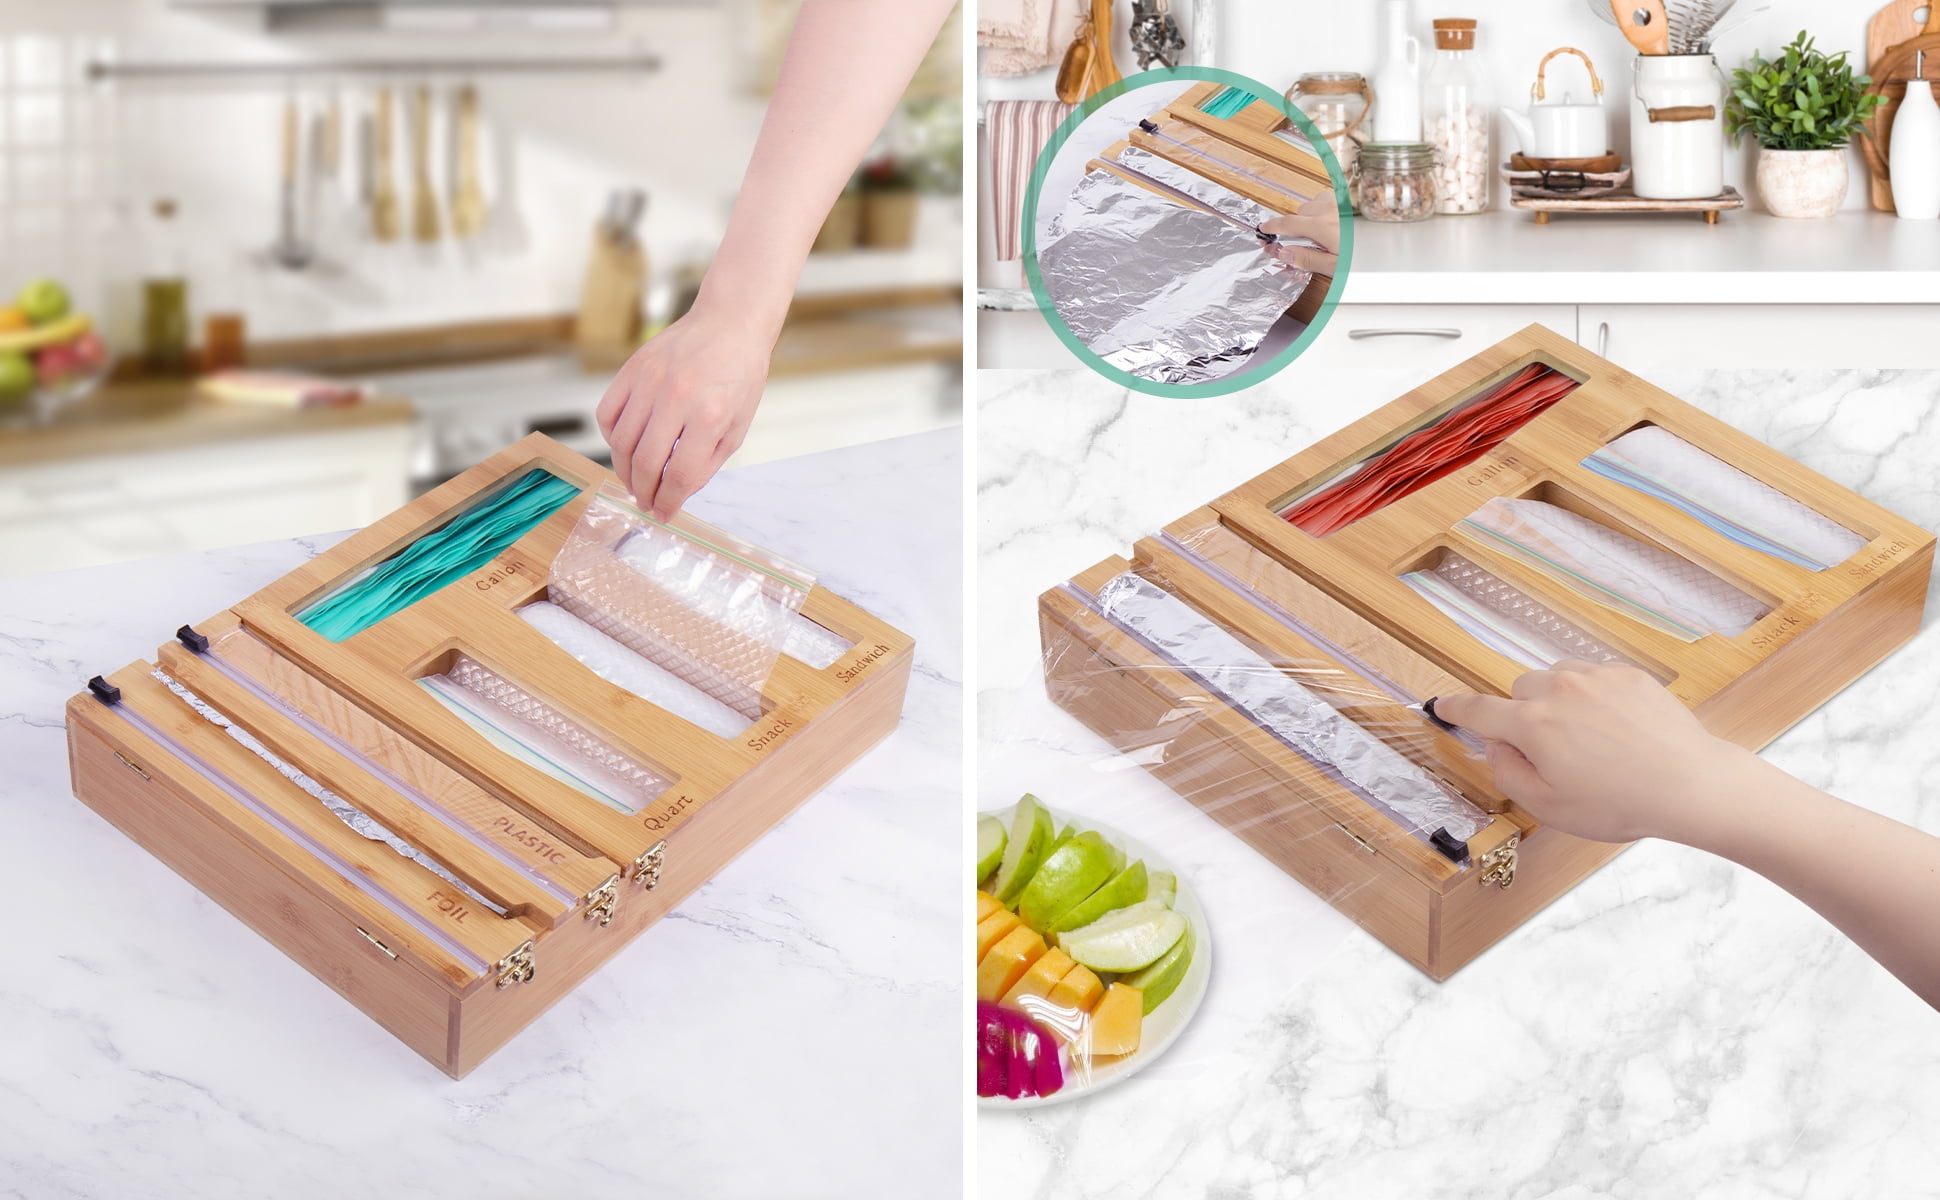 Meiliweser Ziplock Bag Storage Organizer for Kitchen Drawer, Openable Top  Bamboo Holders, Compatible with Ziploc, Solimo, Glad, Hefty for Gallon